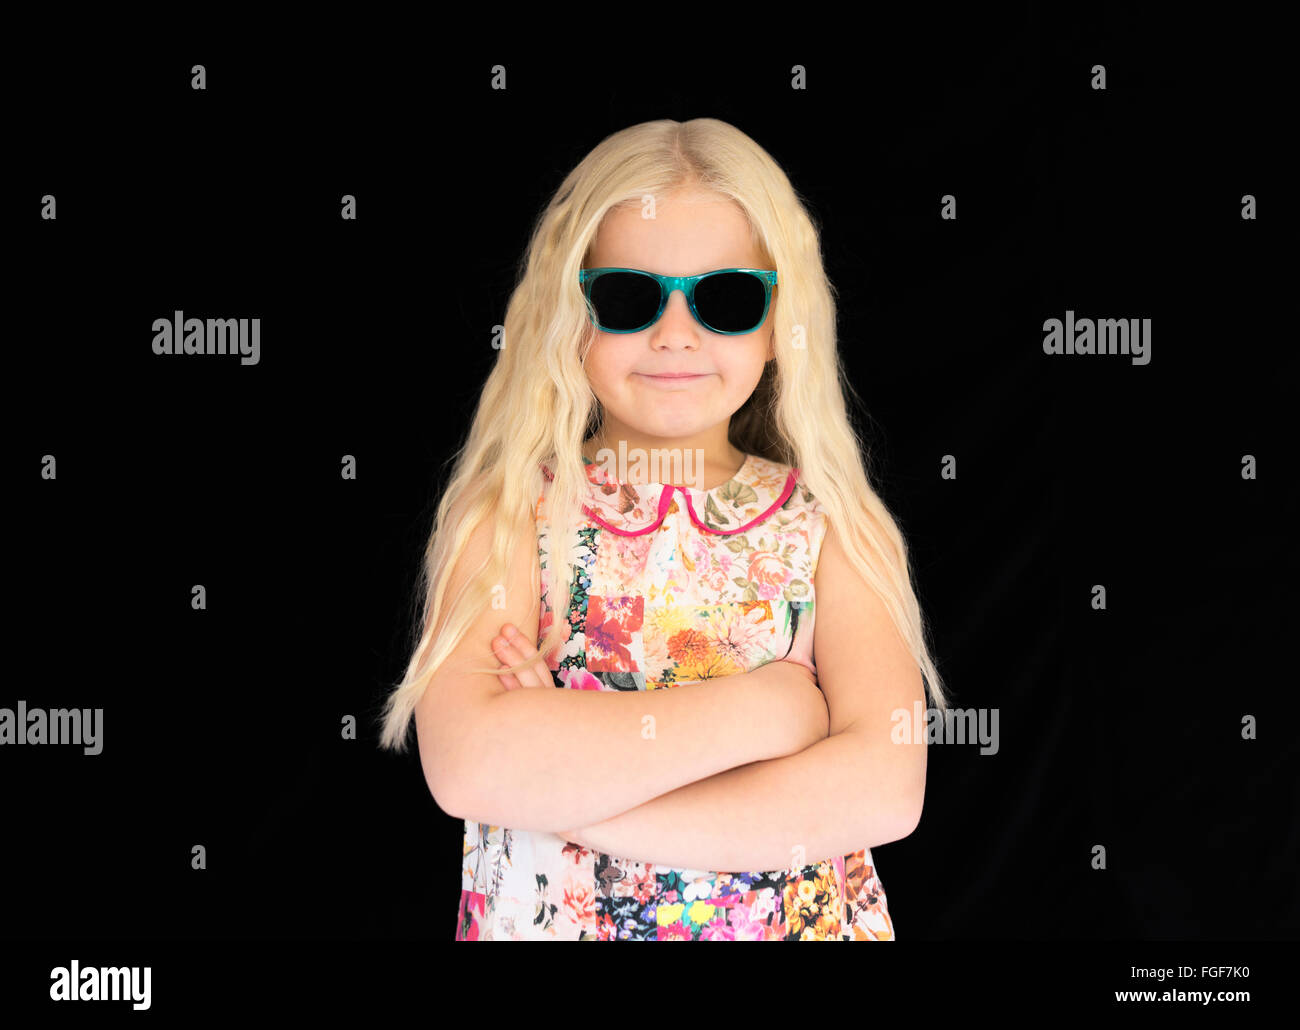 Young girl with long blonde hair wearing sunglasses, smiling Stock Photo